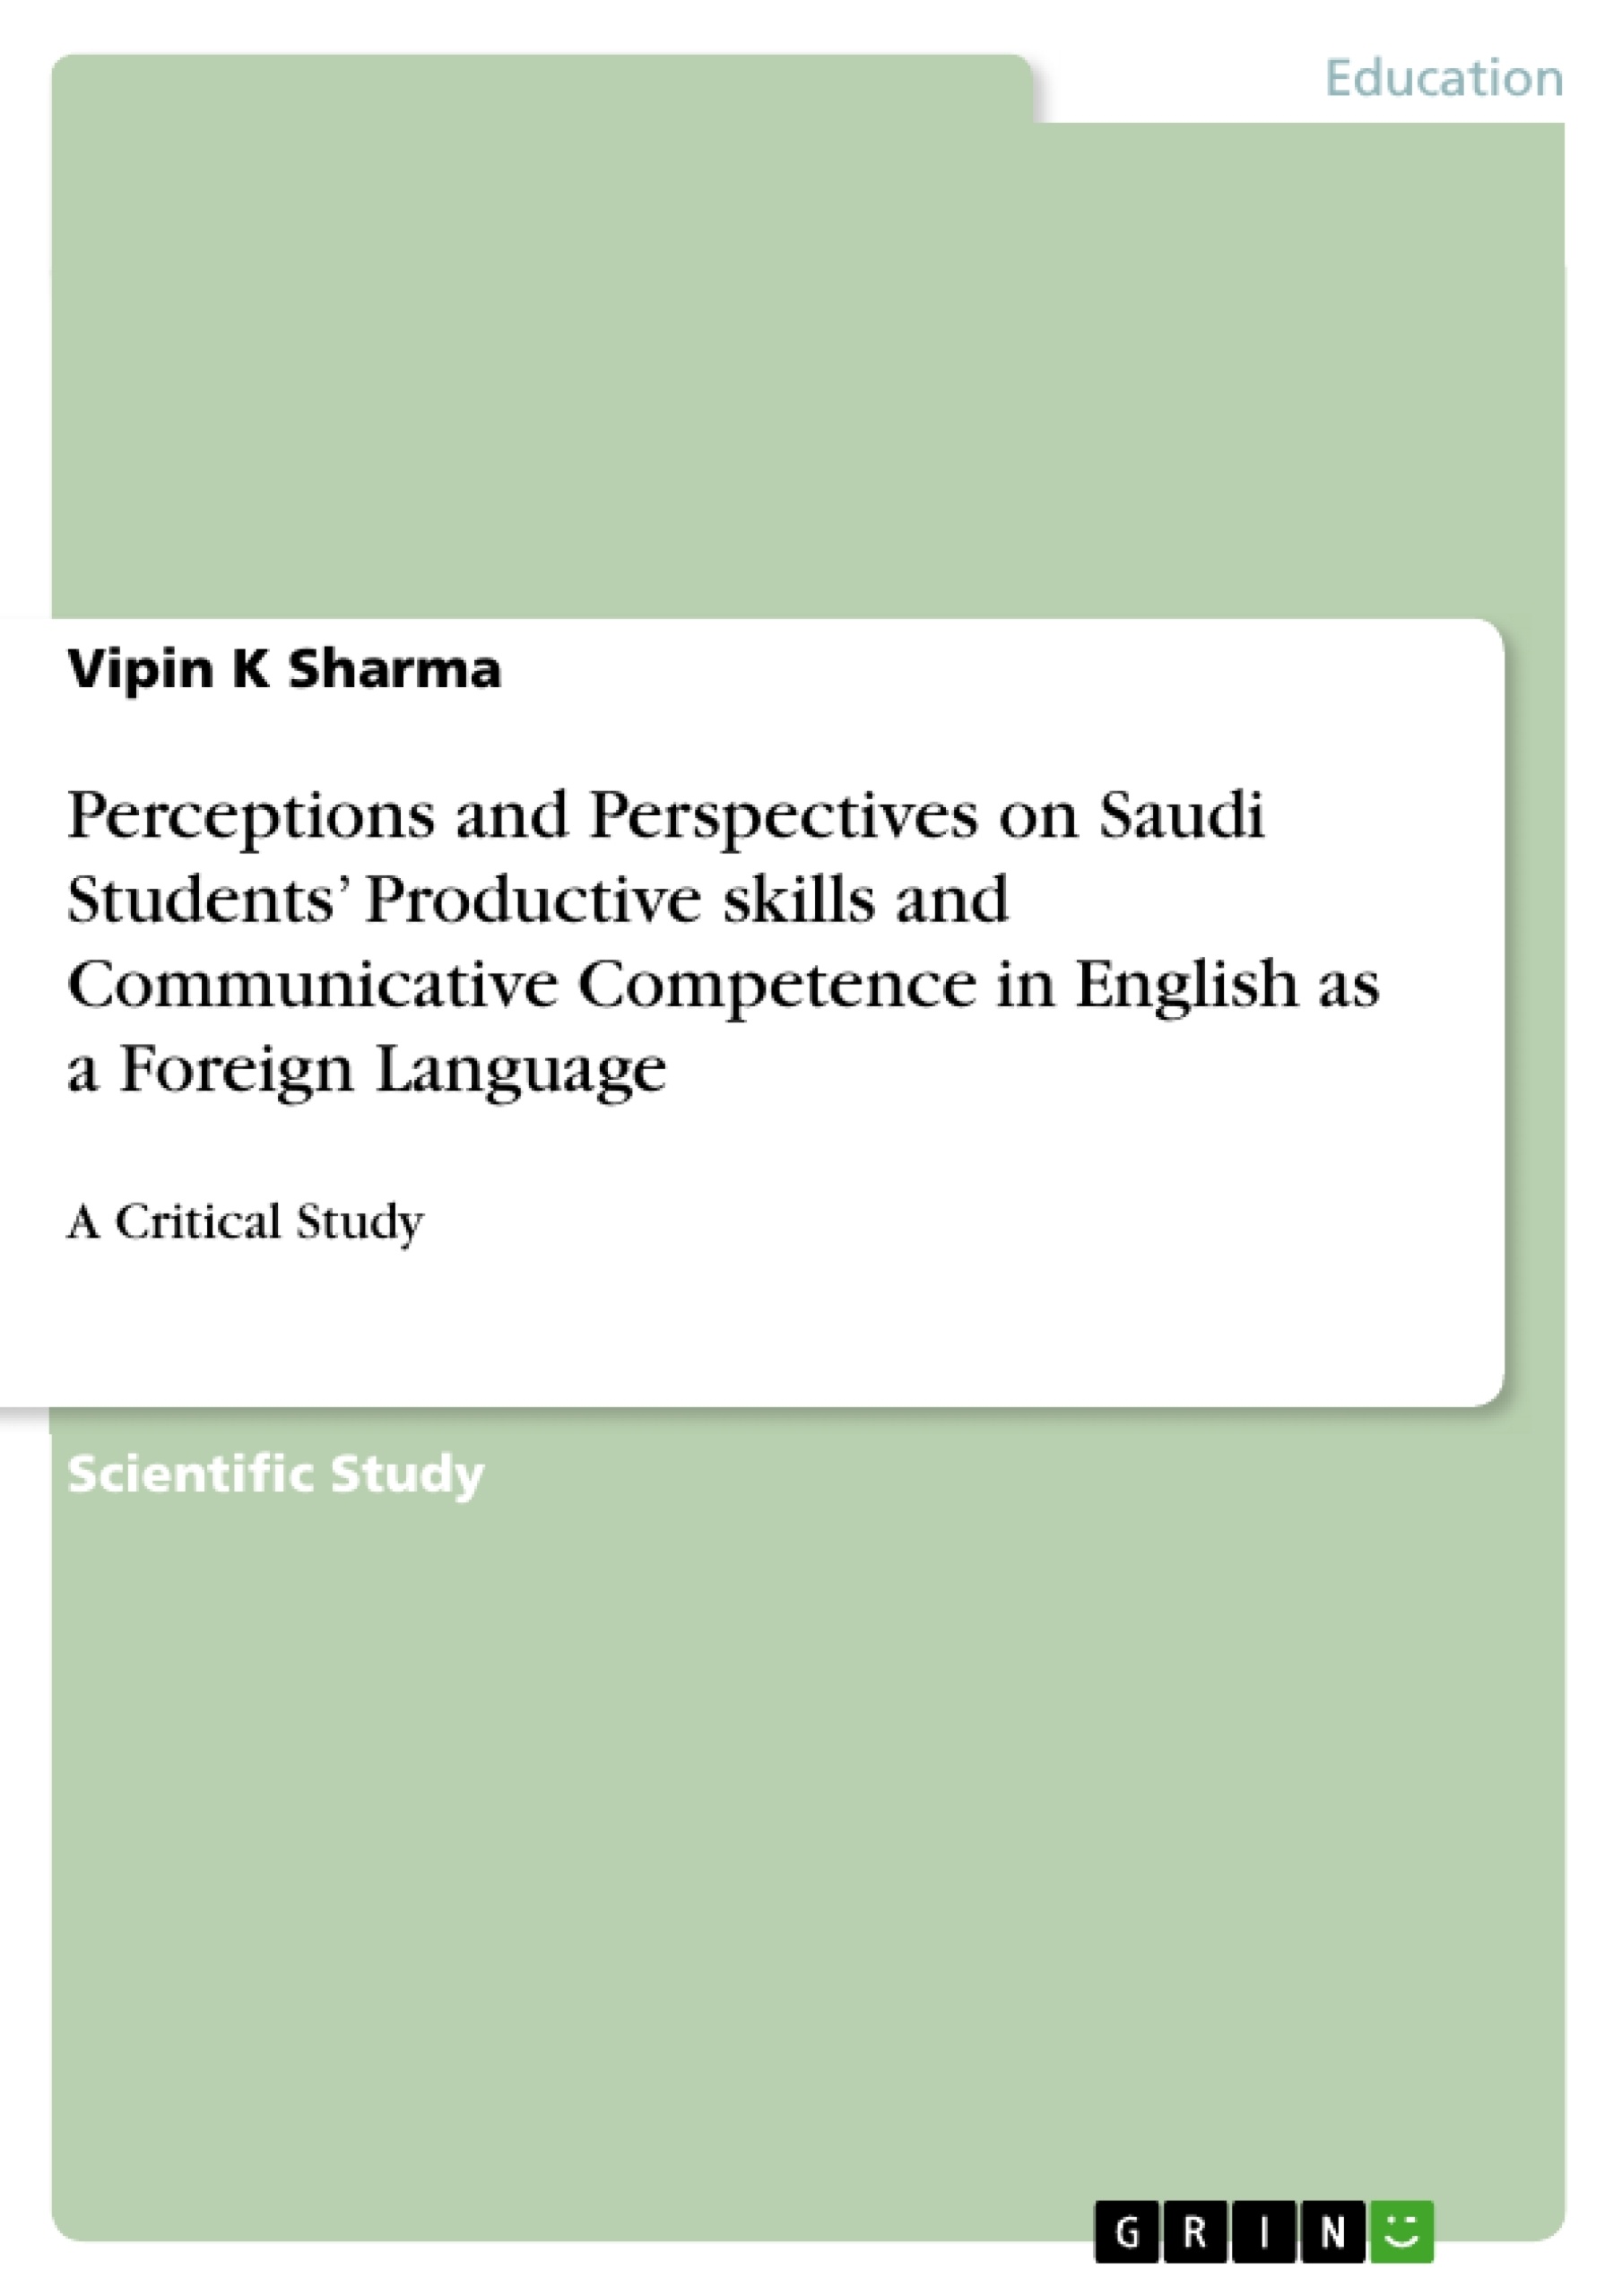 Perceptions　Language　on　Students'　in　English　Communicative　Foreign　a　and　Productive　Saudi　Perspectives　as　Competence　skills　and　GRIN